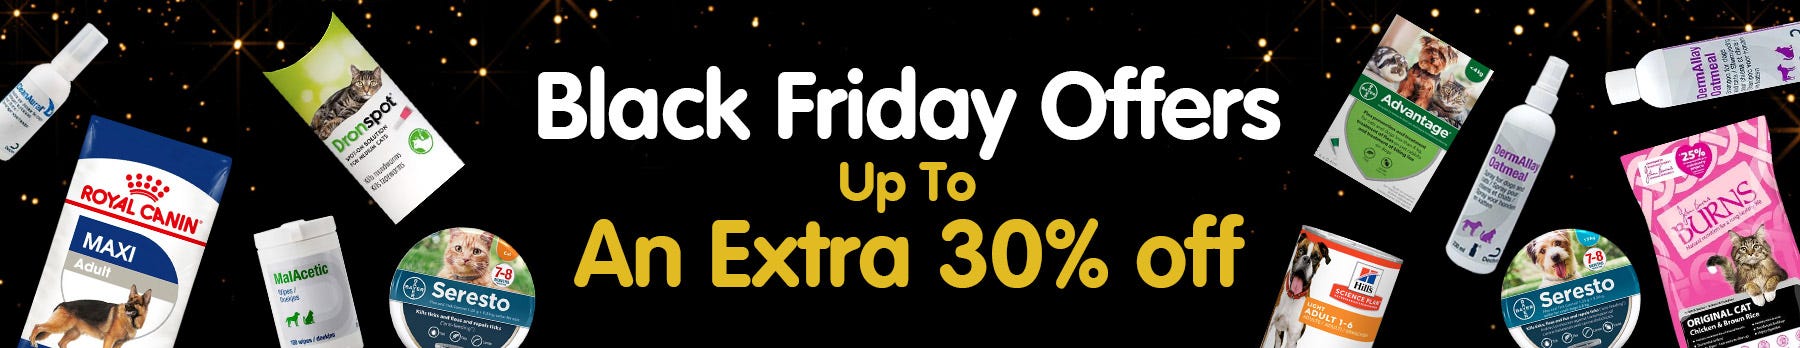 Black Friday Offers - Up to an extra 30% off